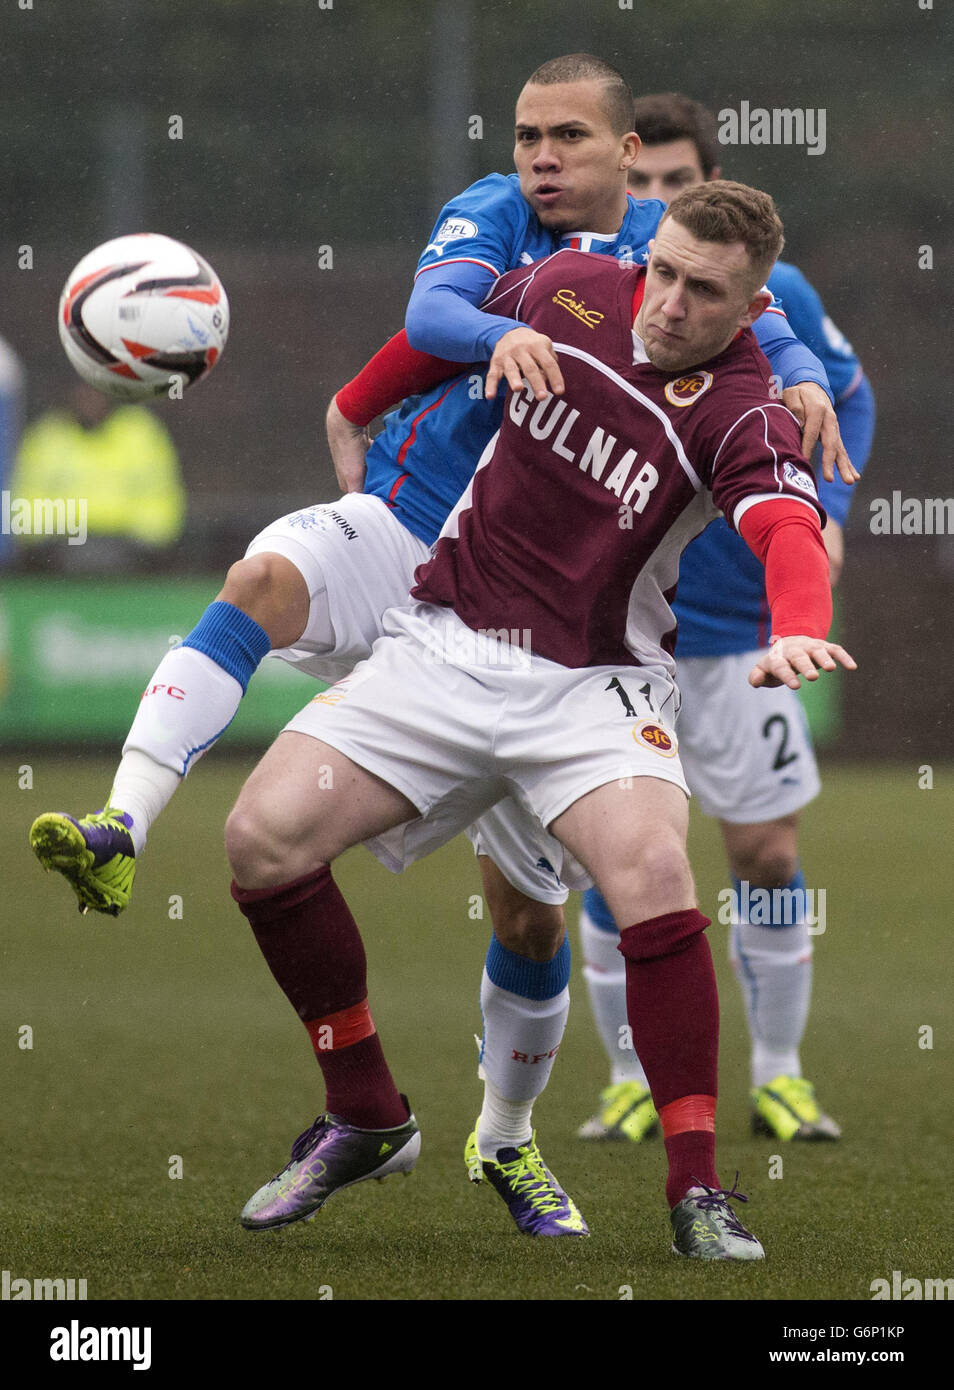 Rangers' Arnold Peralta and Stenhousemuir's Kevin McKinlay in action during the Scottish League One match at Ochilview Park, Stenhousemuir Stock Photo